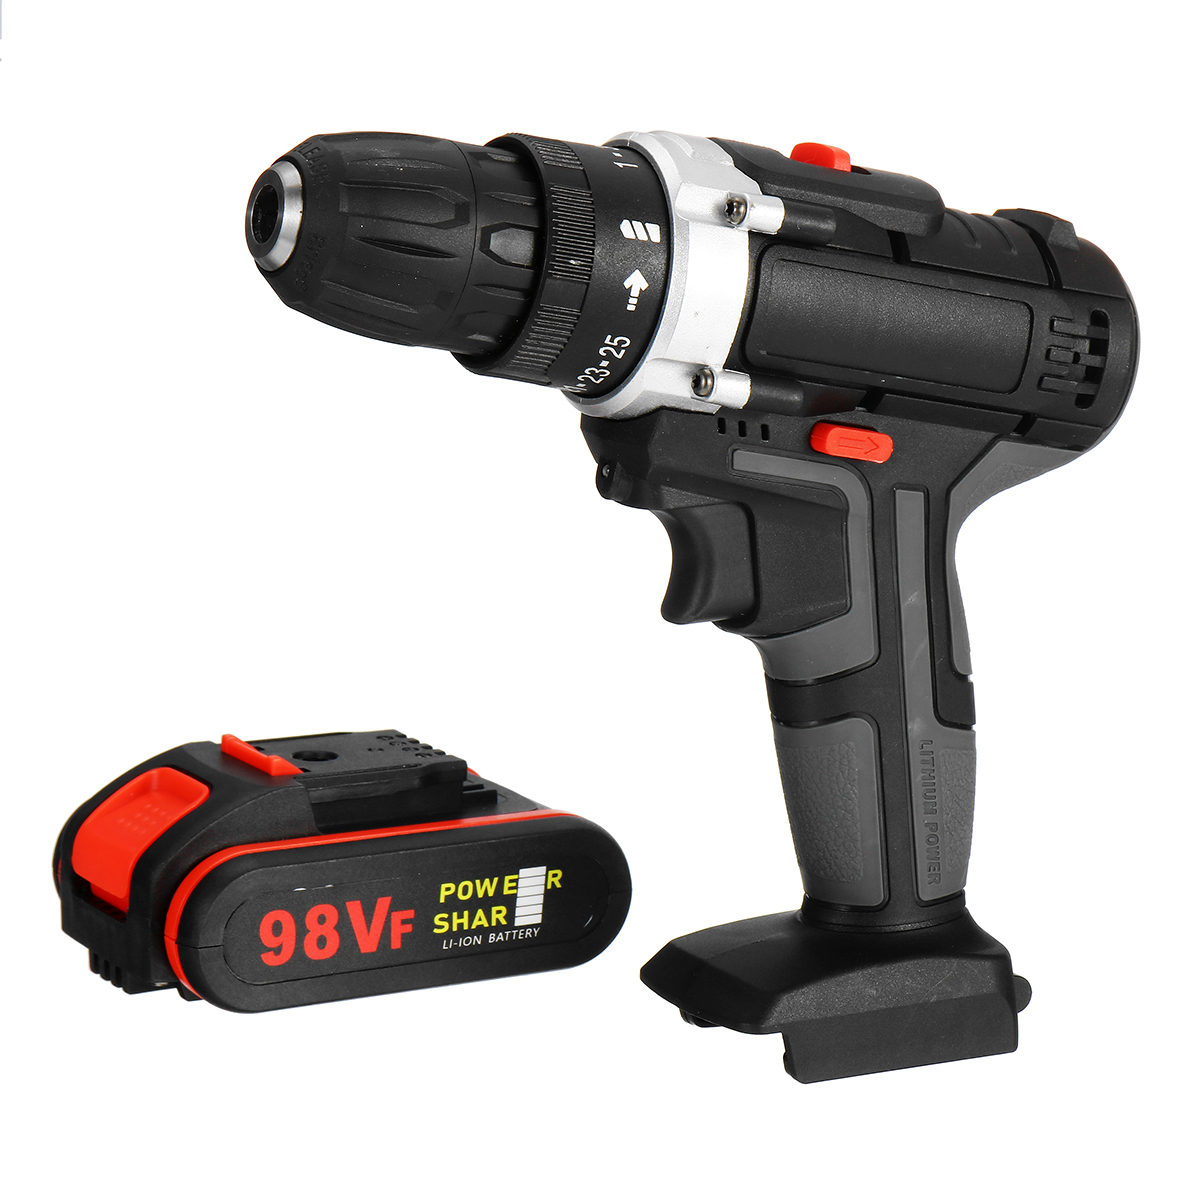 98VF-Rechargeable-Electric-Cordless-Impact-Drill-Screwdriver-251-Torque-LED-1569430-8